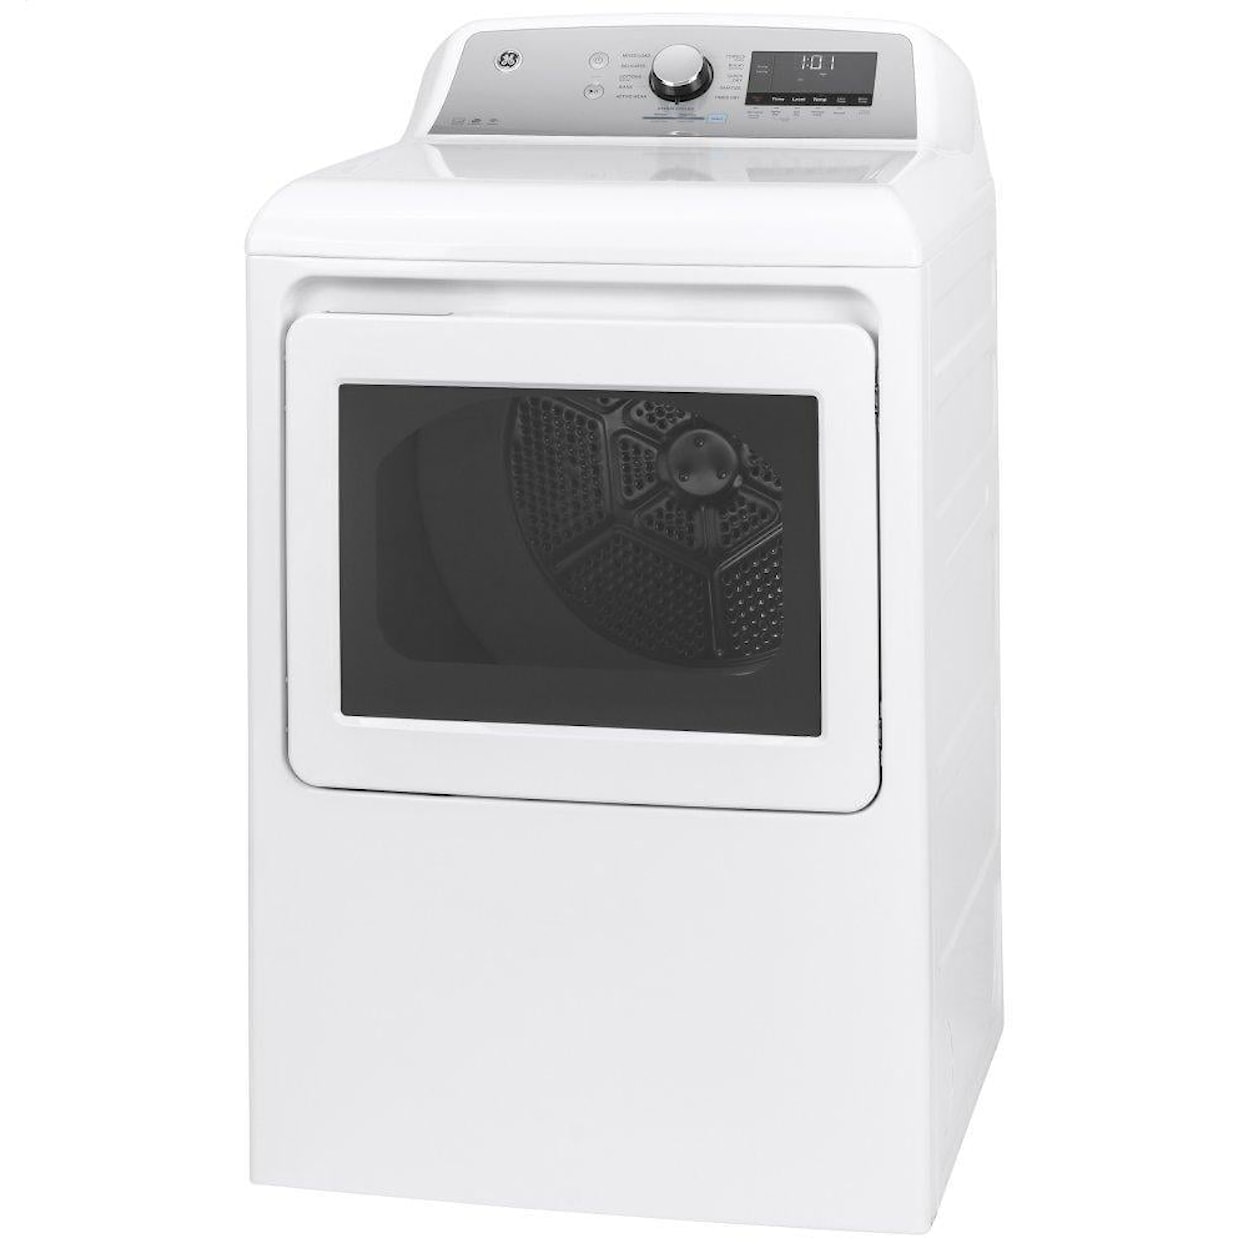 GE Appliances Laundry Top Load Matching Electric Dryer